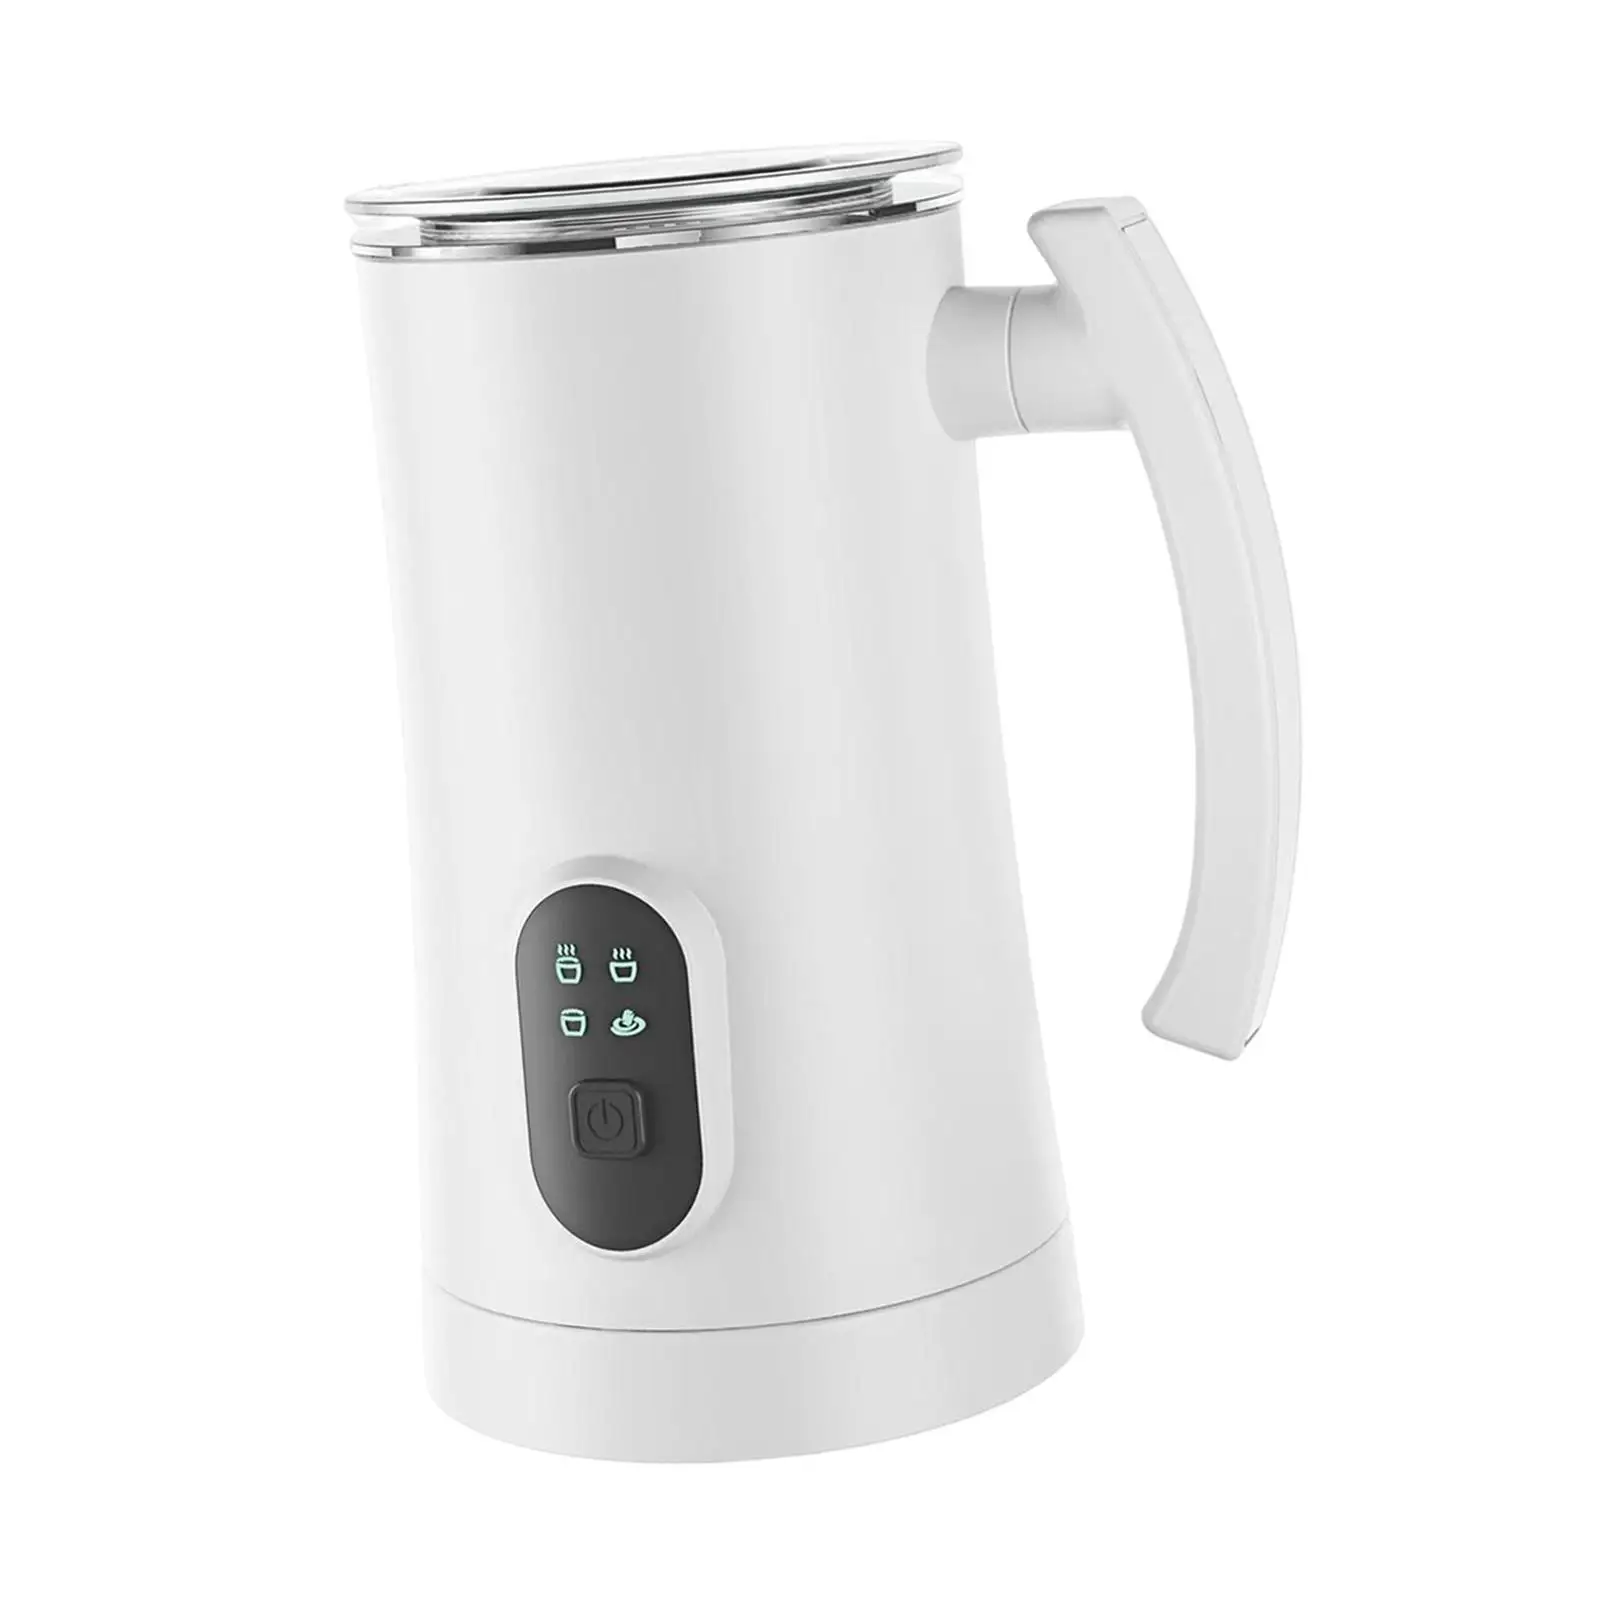 4 in 1 Electric Milk Steamer Portable Stainless Steel Hot and Cold Milk Frother Latte Foam Making Automatic Milk Warmer